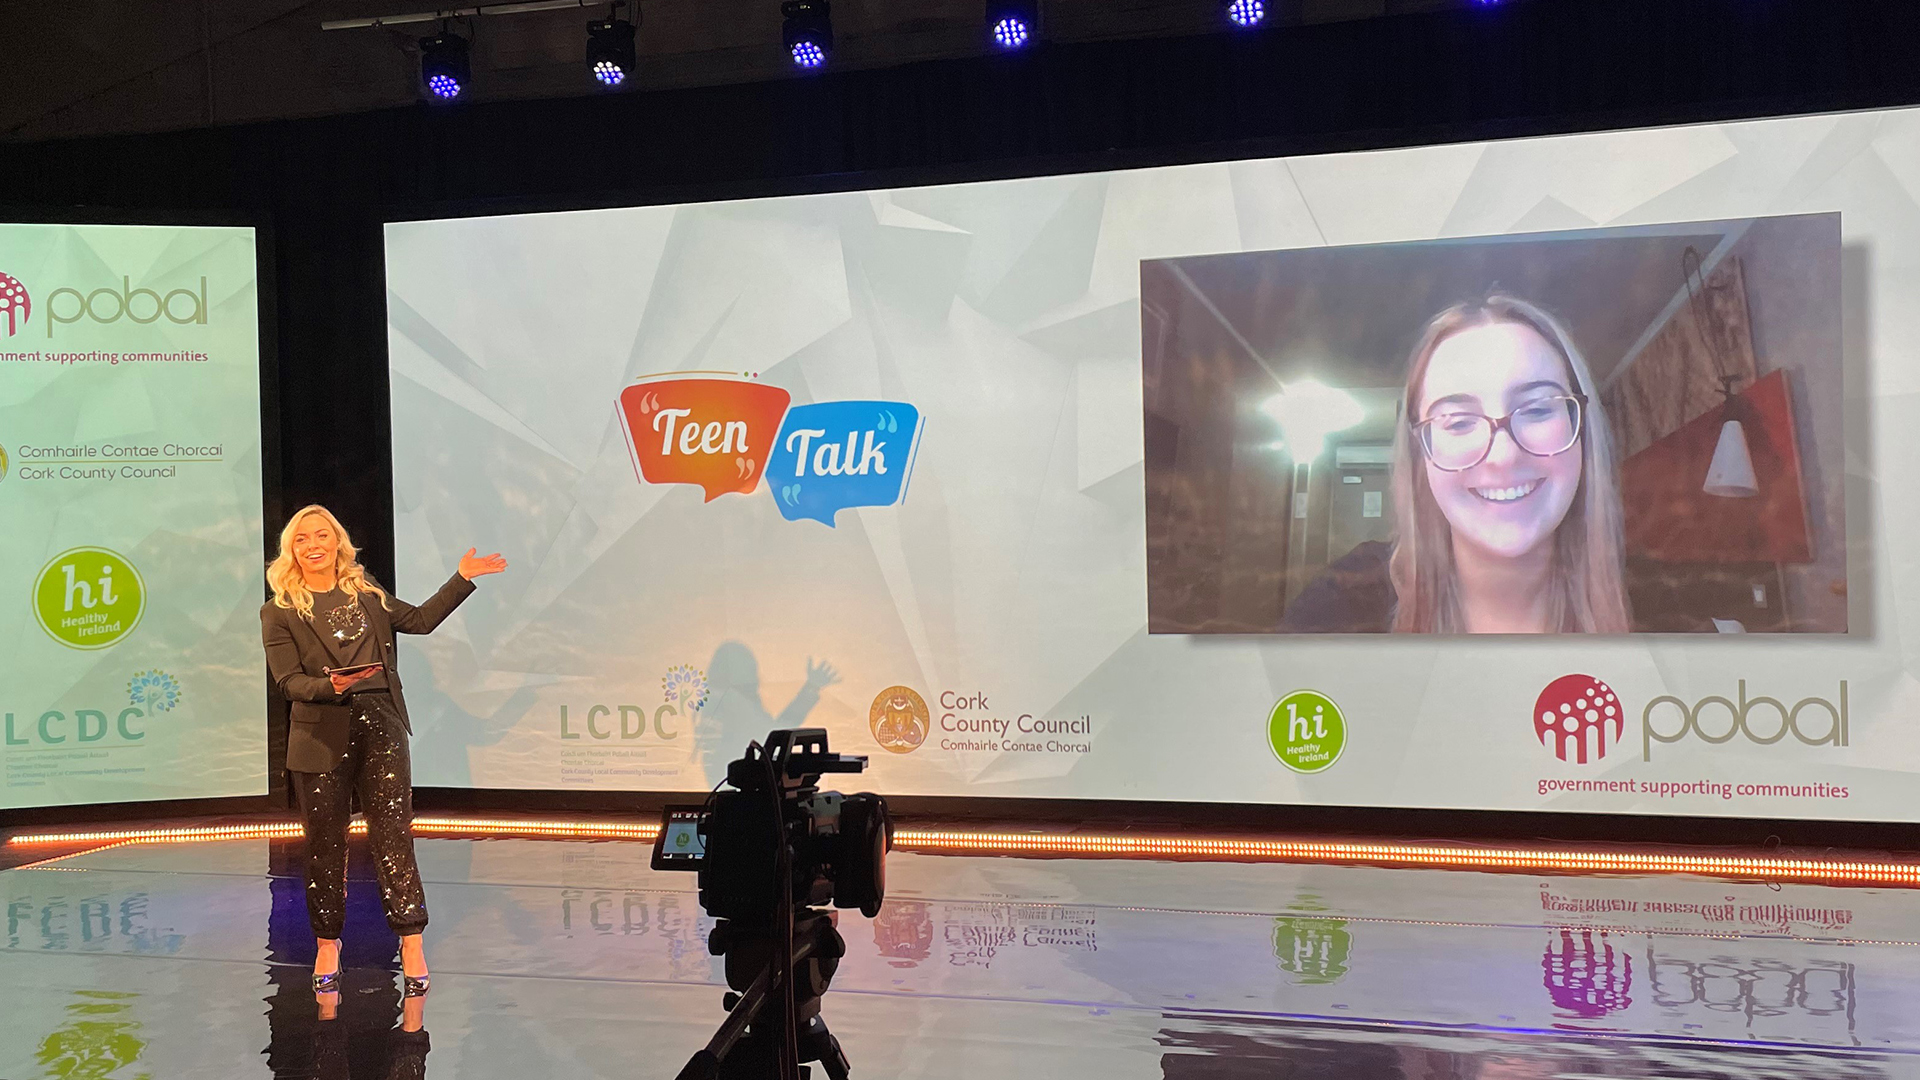 Teen Talk was streamed directly to schools, with the Gen Z event streamed for parents. Host Anna Geary lead a series of discussions on the impact of the pandemic on the mental health of young people.